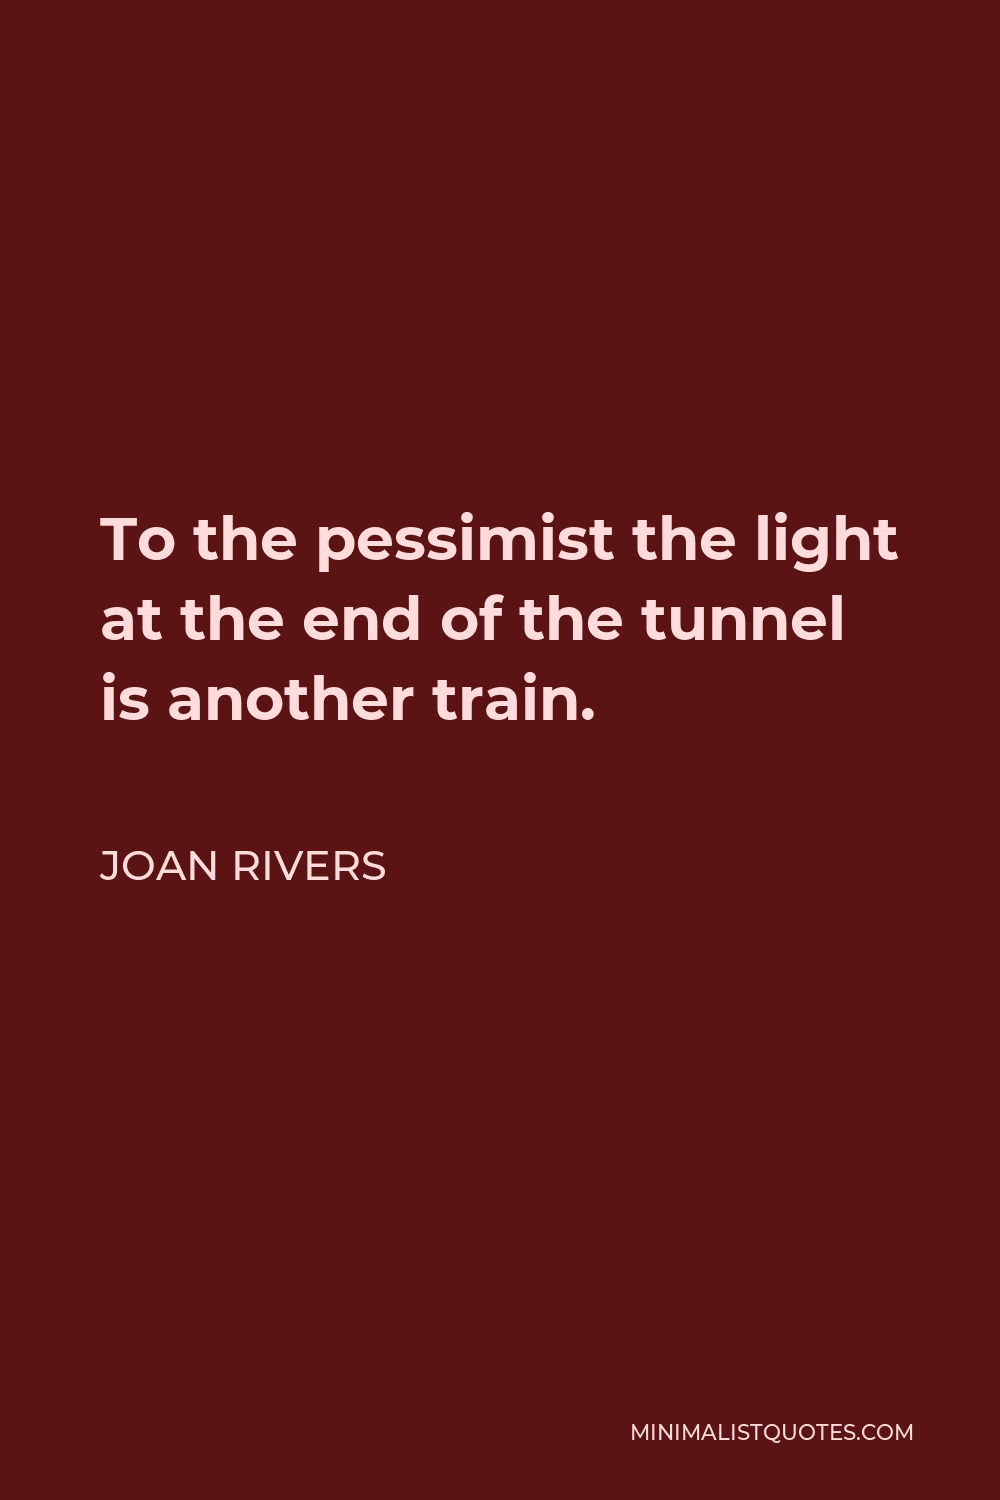 Joan Rivers Quote - To the pessimist the light at the end of the tunnel is another train.